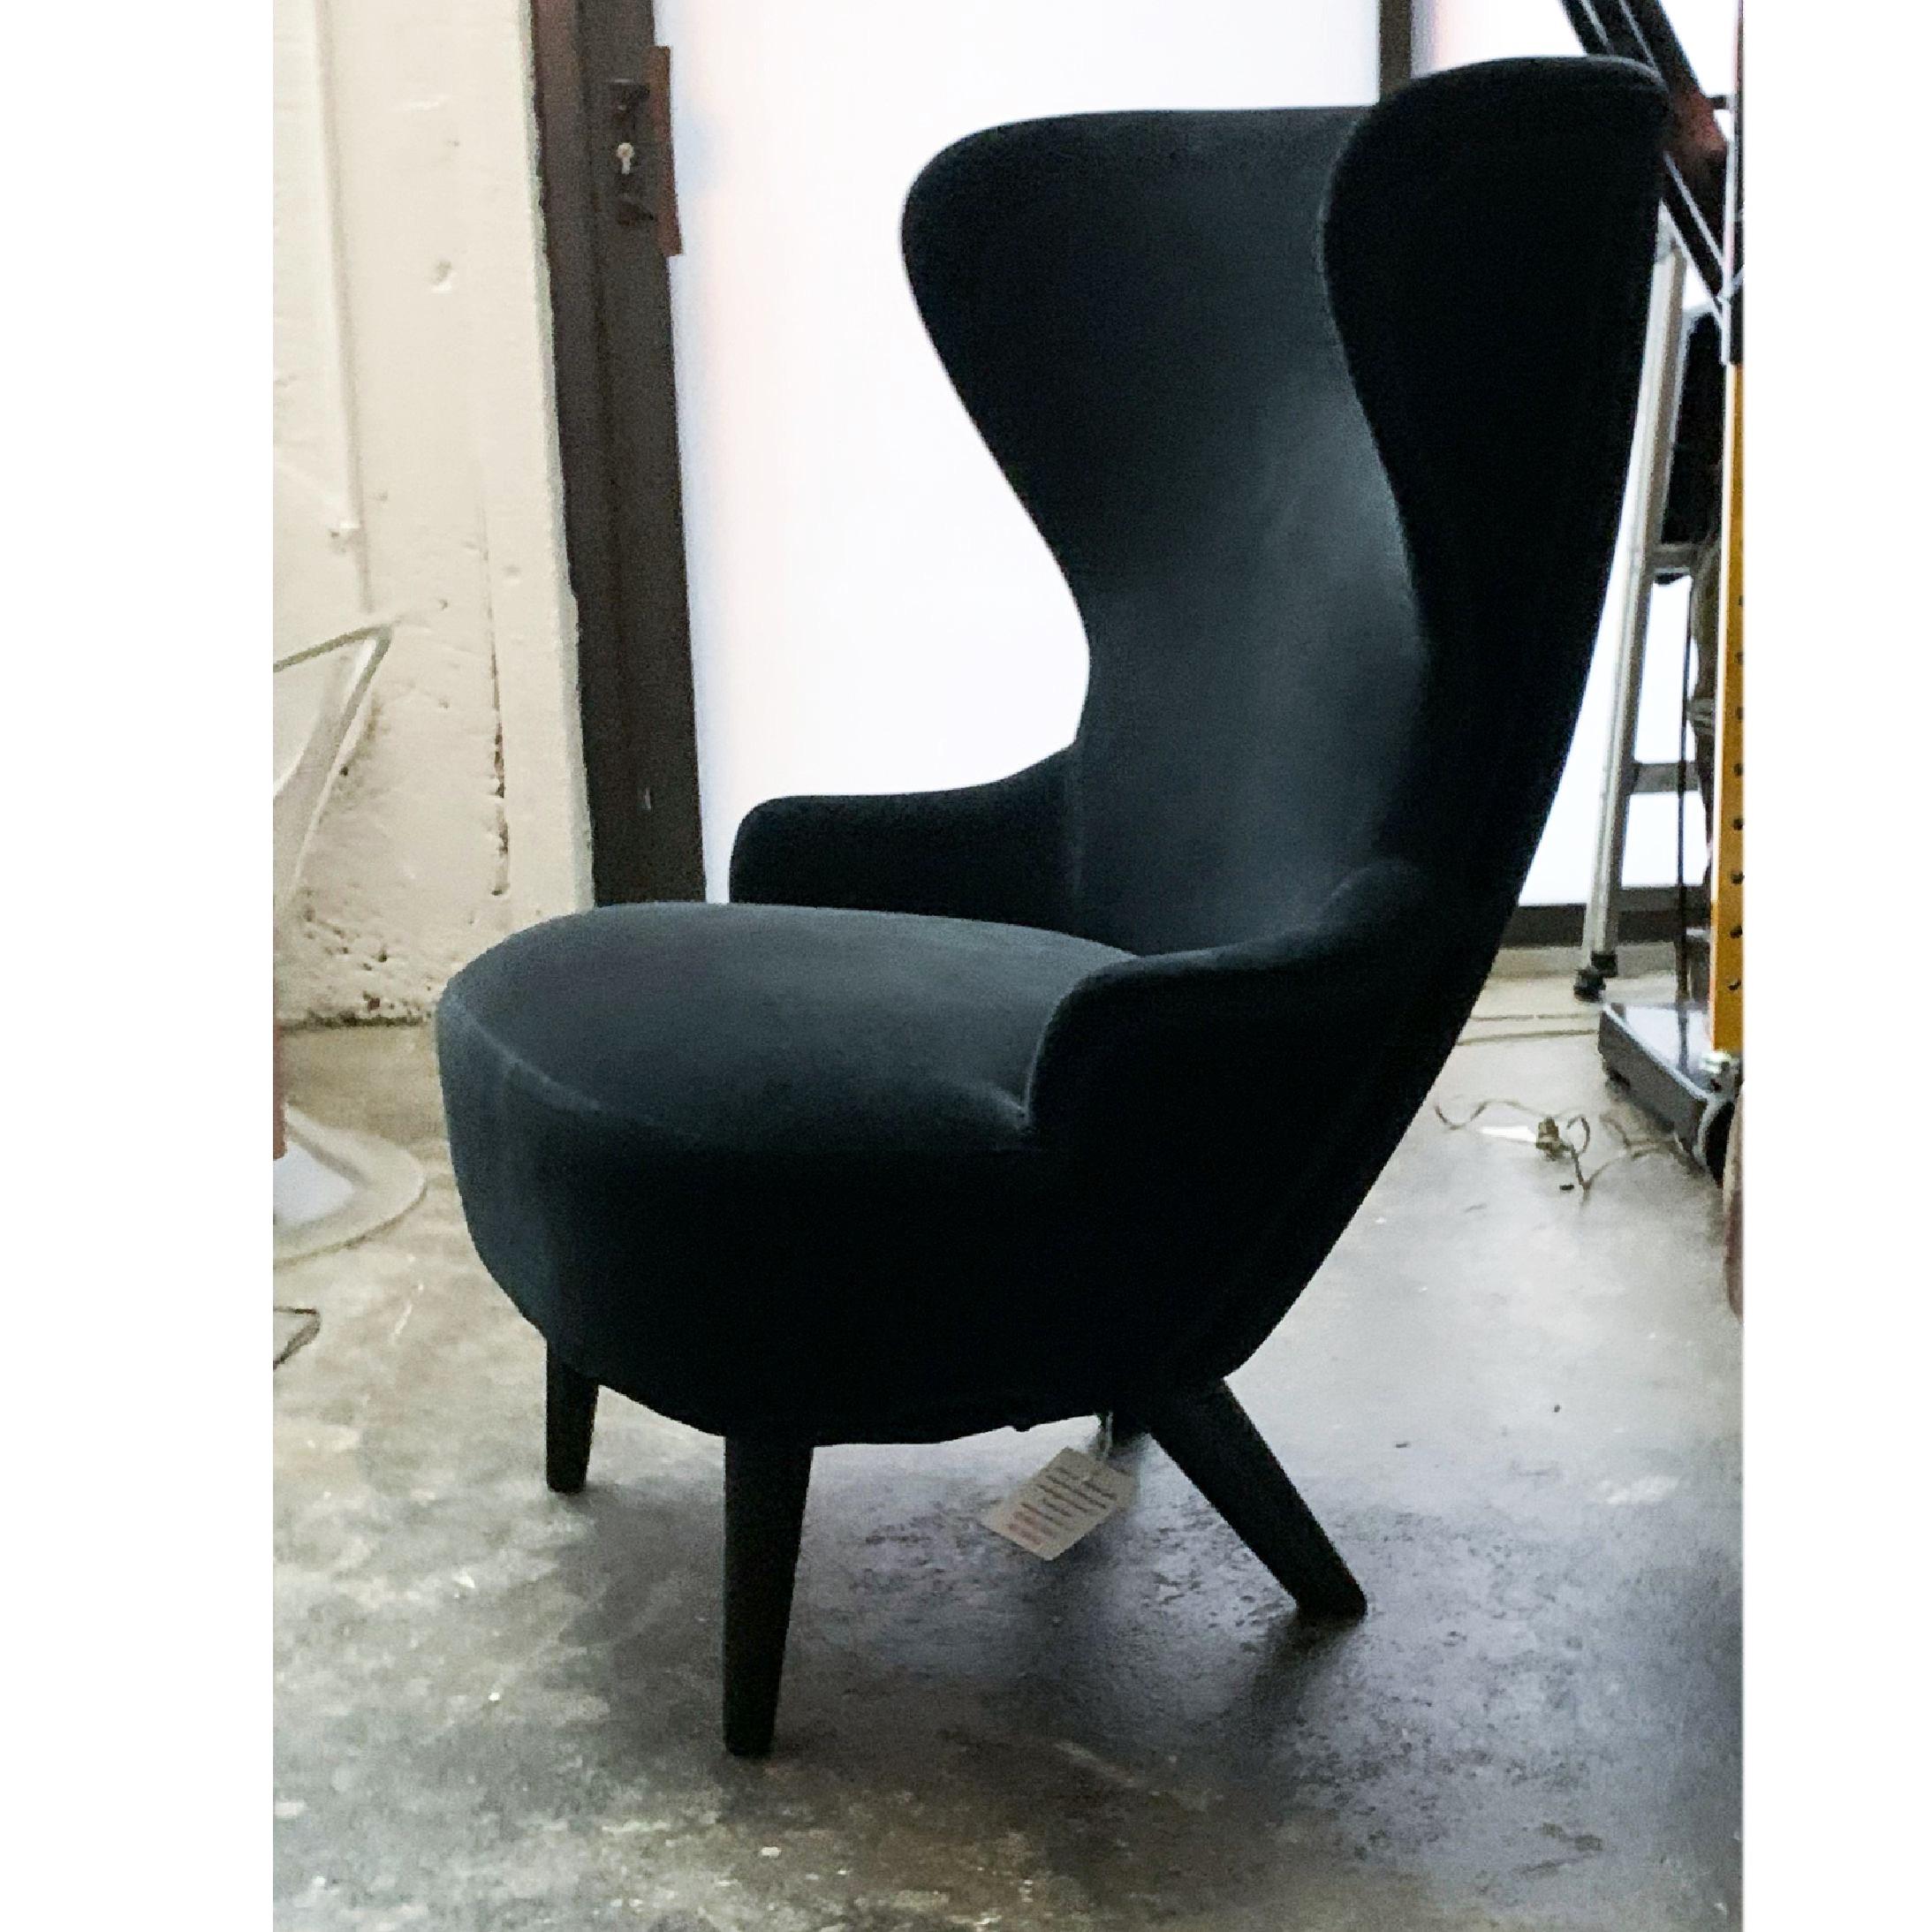 Tom Dixon wingback armchair lounge, George Smith, UK, black velvet.

Wingback was inspired by traditional 17th century Wingback and balloon-back archetypes, and was developed for Shoreditch House Members Club. Its expressive sweeping curves allows